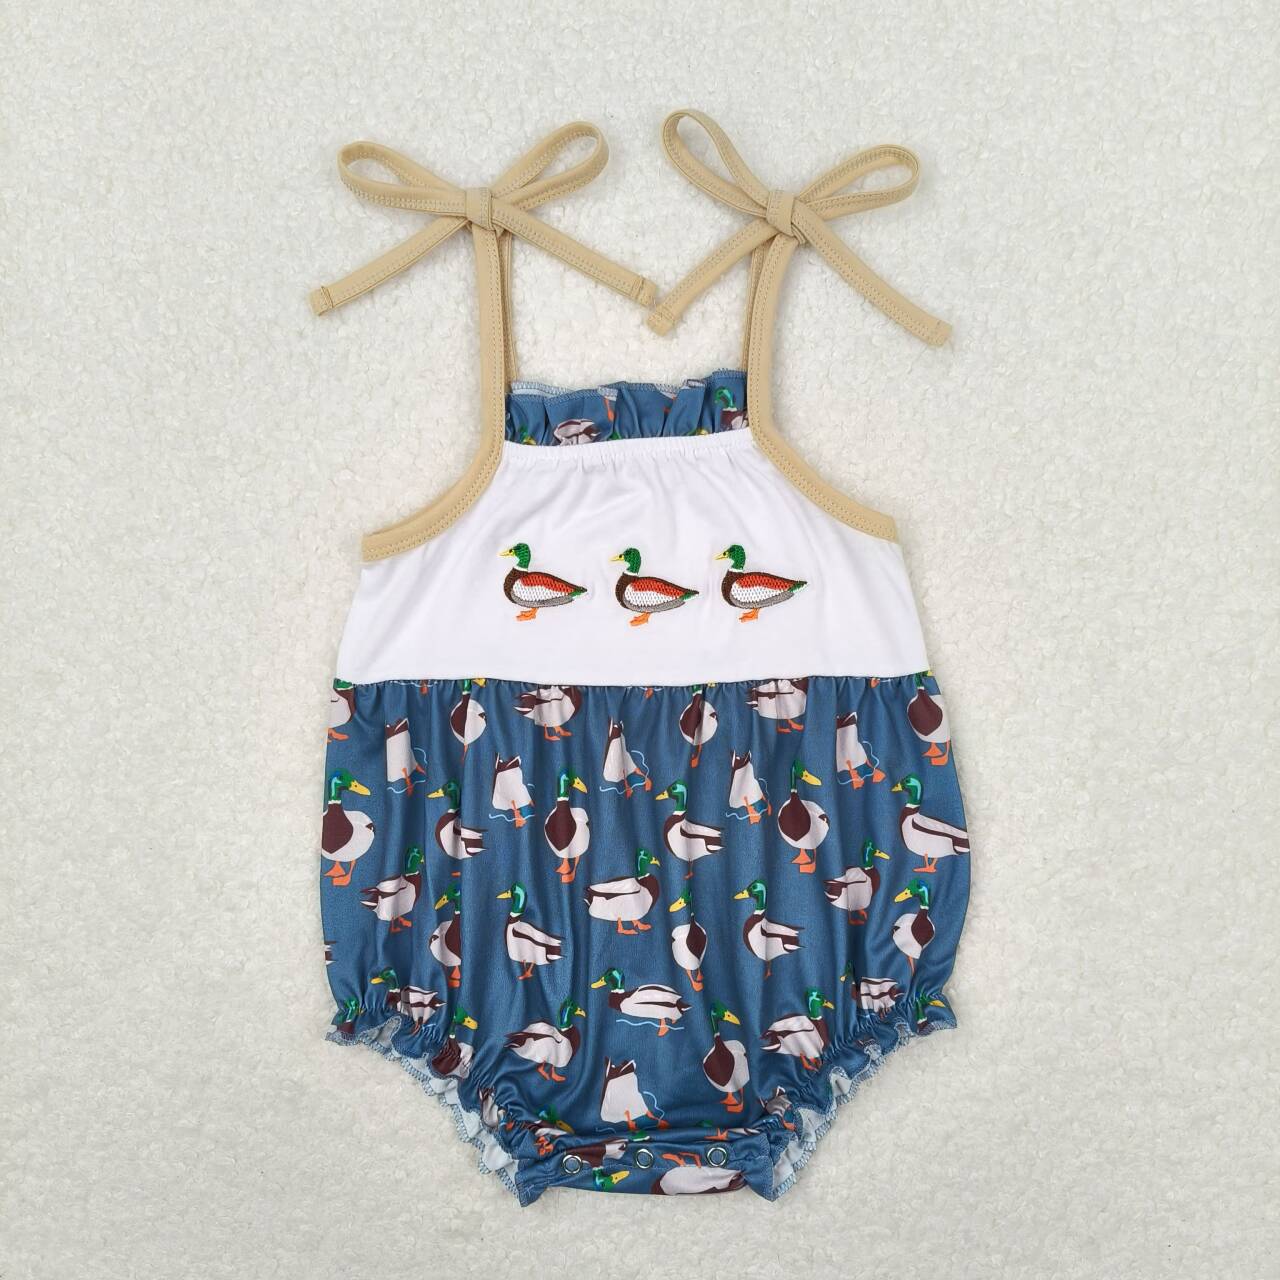 SR1133 Embroidered duck blue camisole jumpsuit